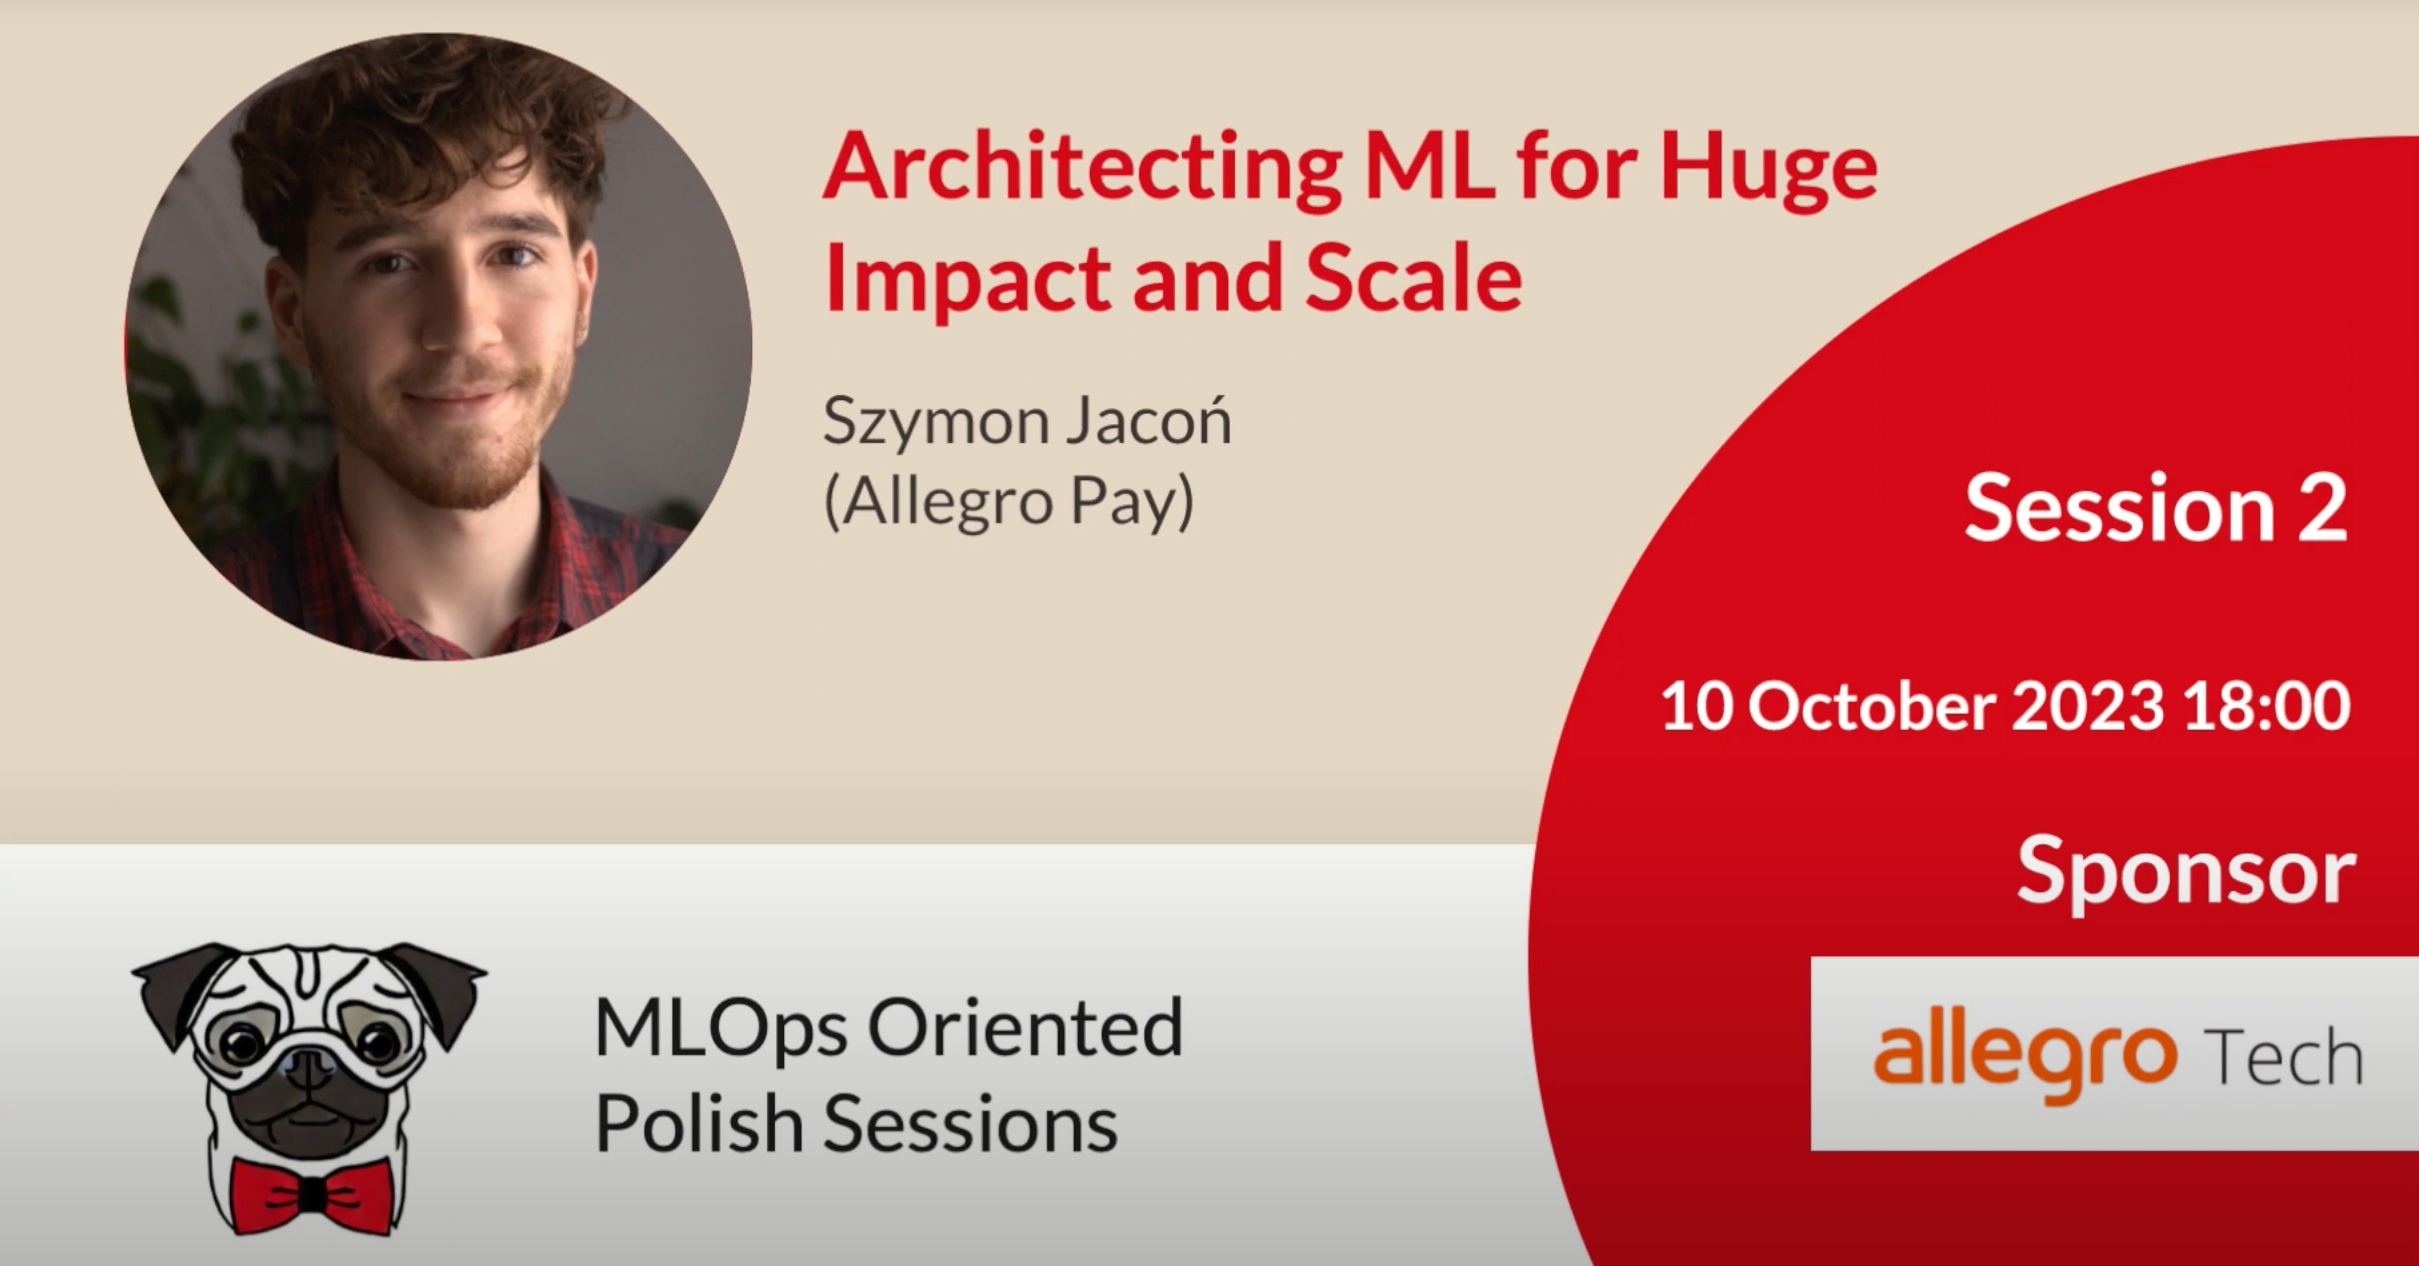 Architecting ML for Huge Impact and Scale